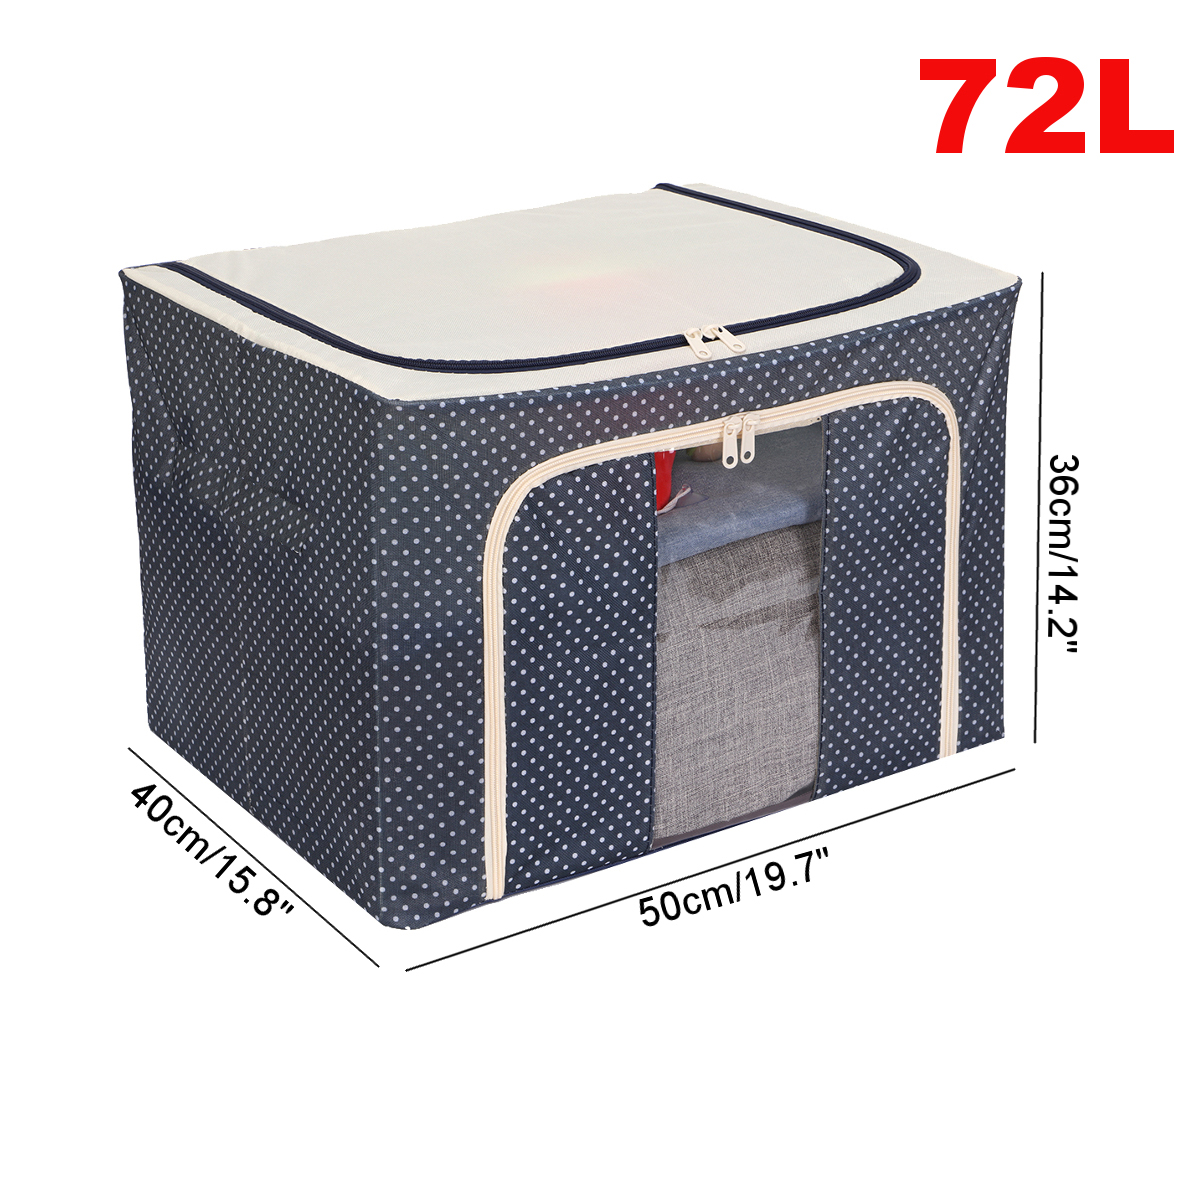 Storage-Bags-72L-Large-Blanket-Clothes-Organization-Containers-Bedding-Comforters-Foldable-Organizer-1914855-7